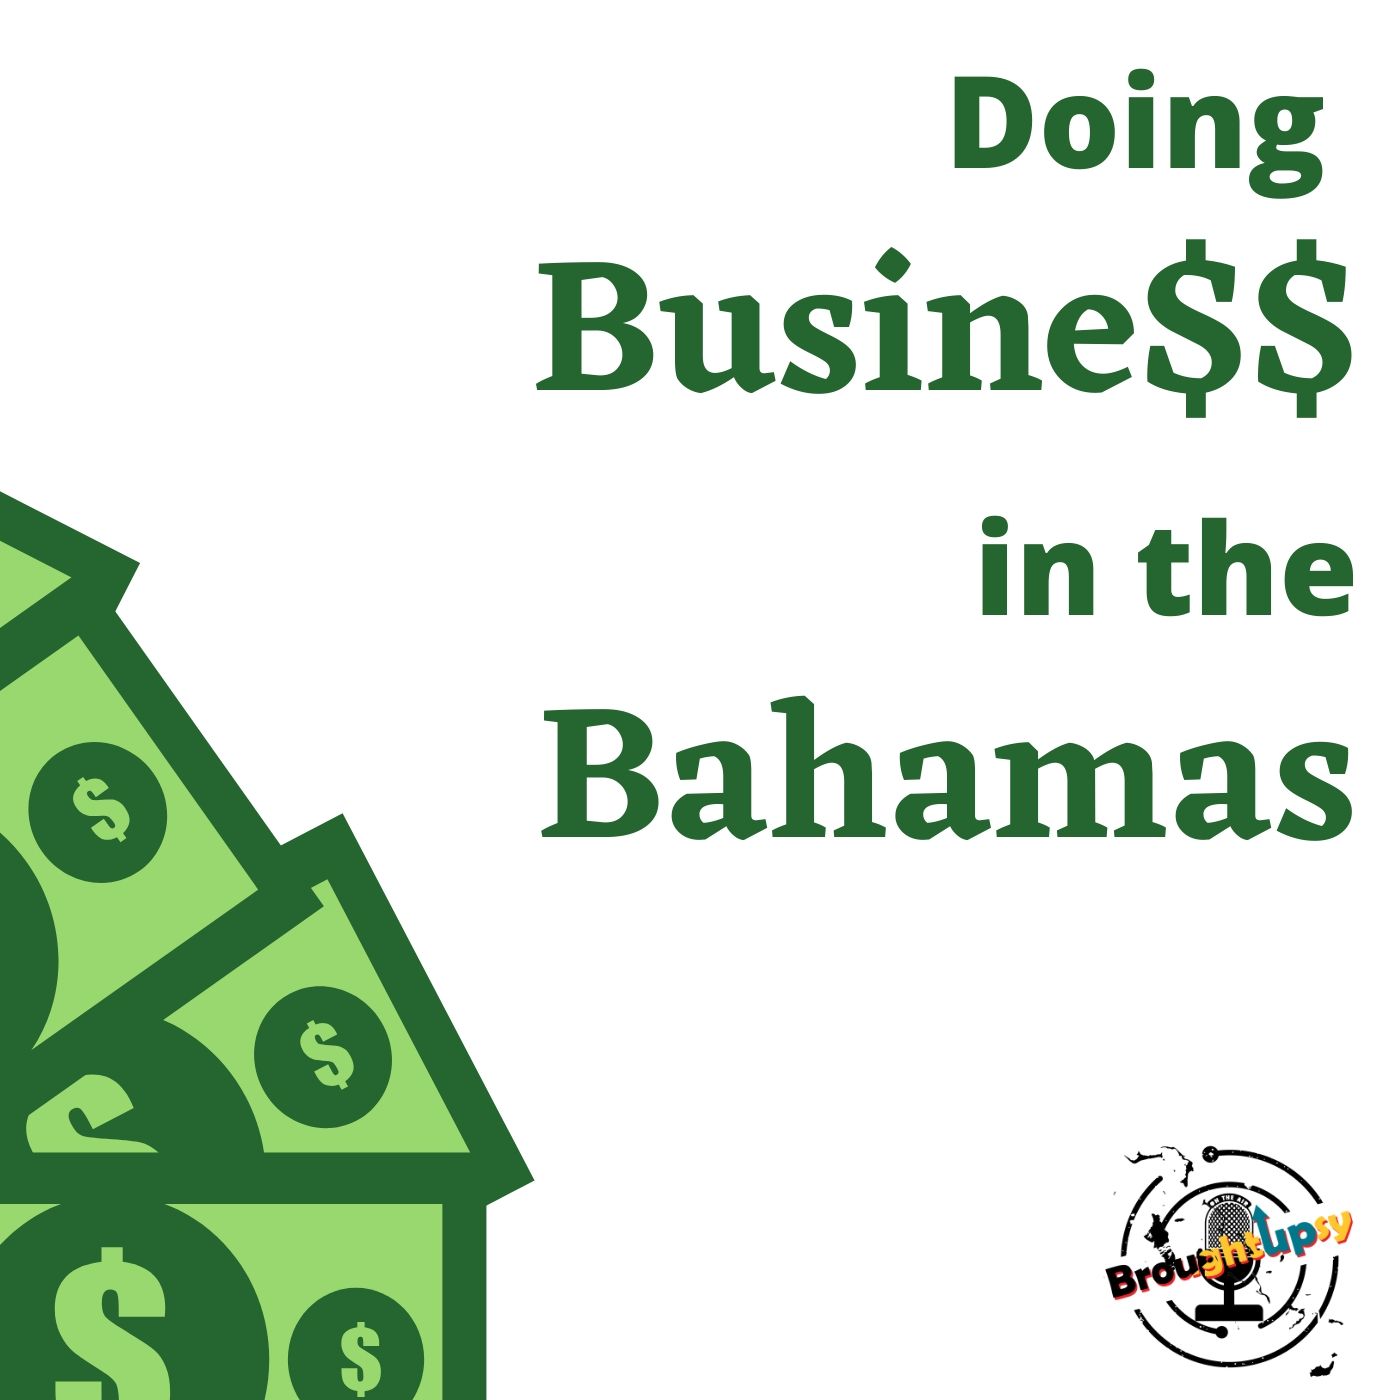 Doing business in the Bahamas